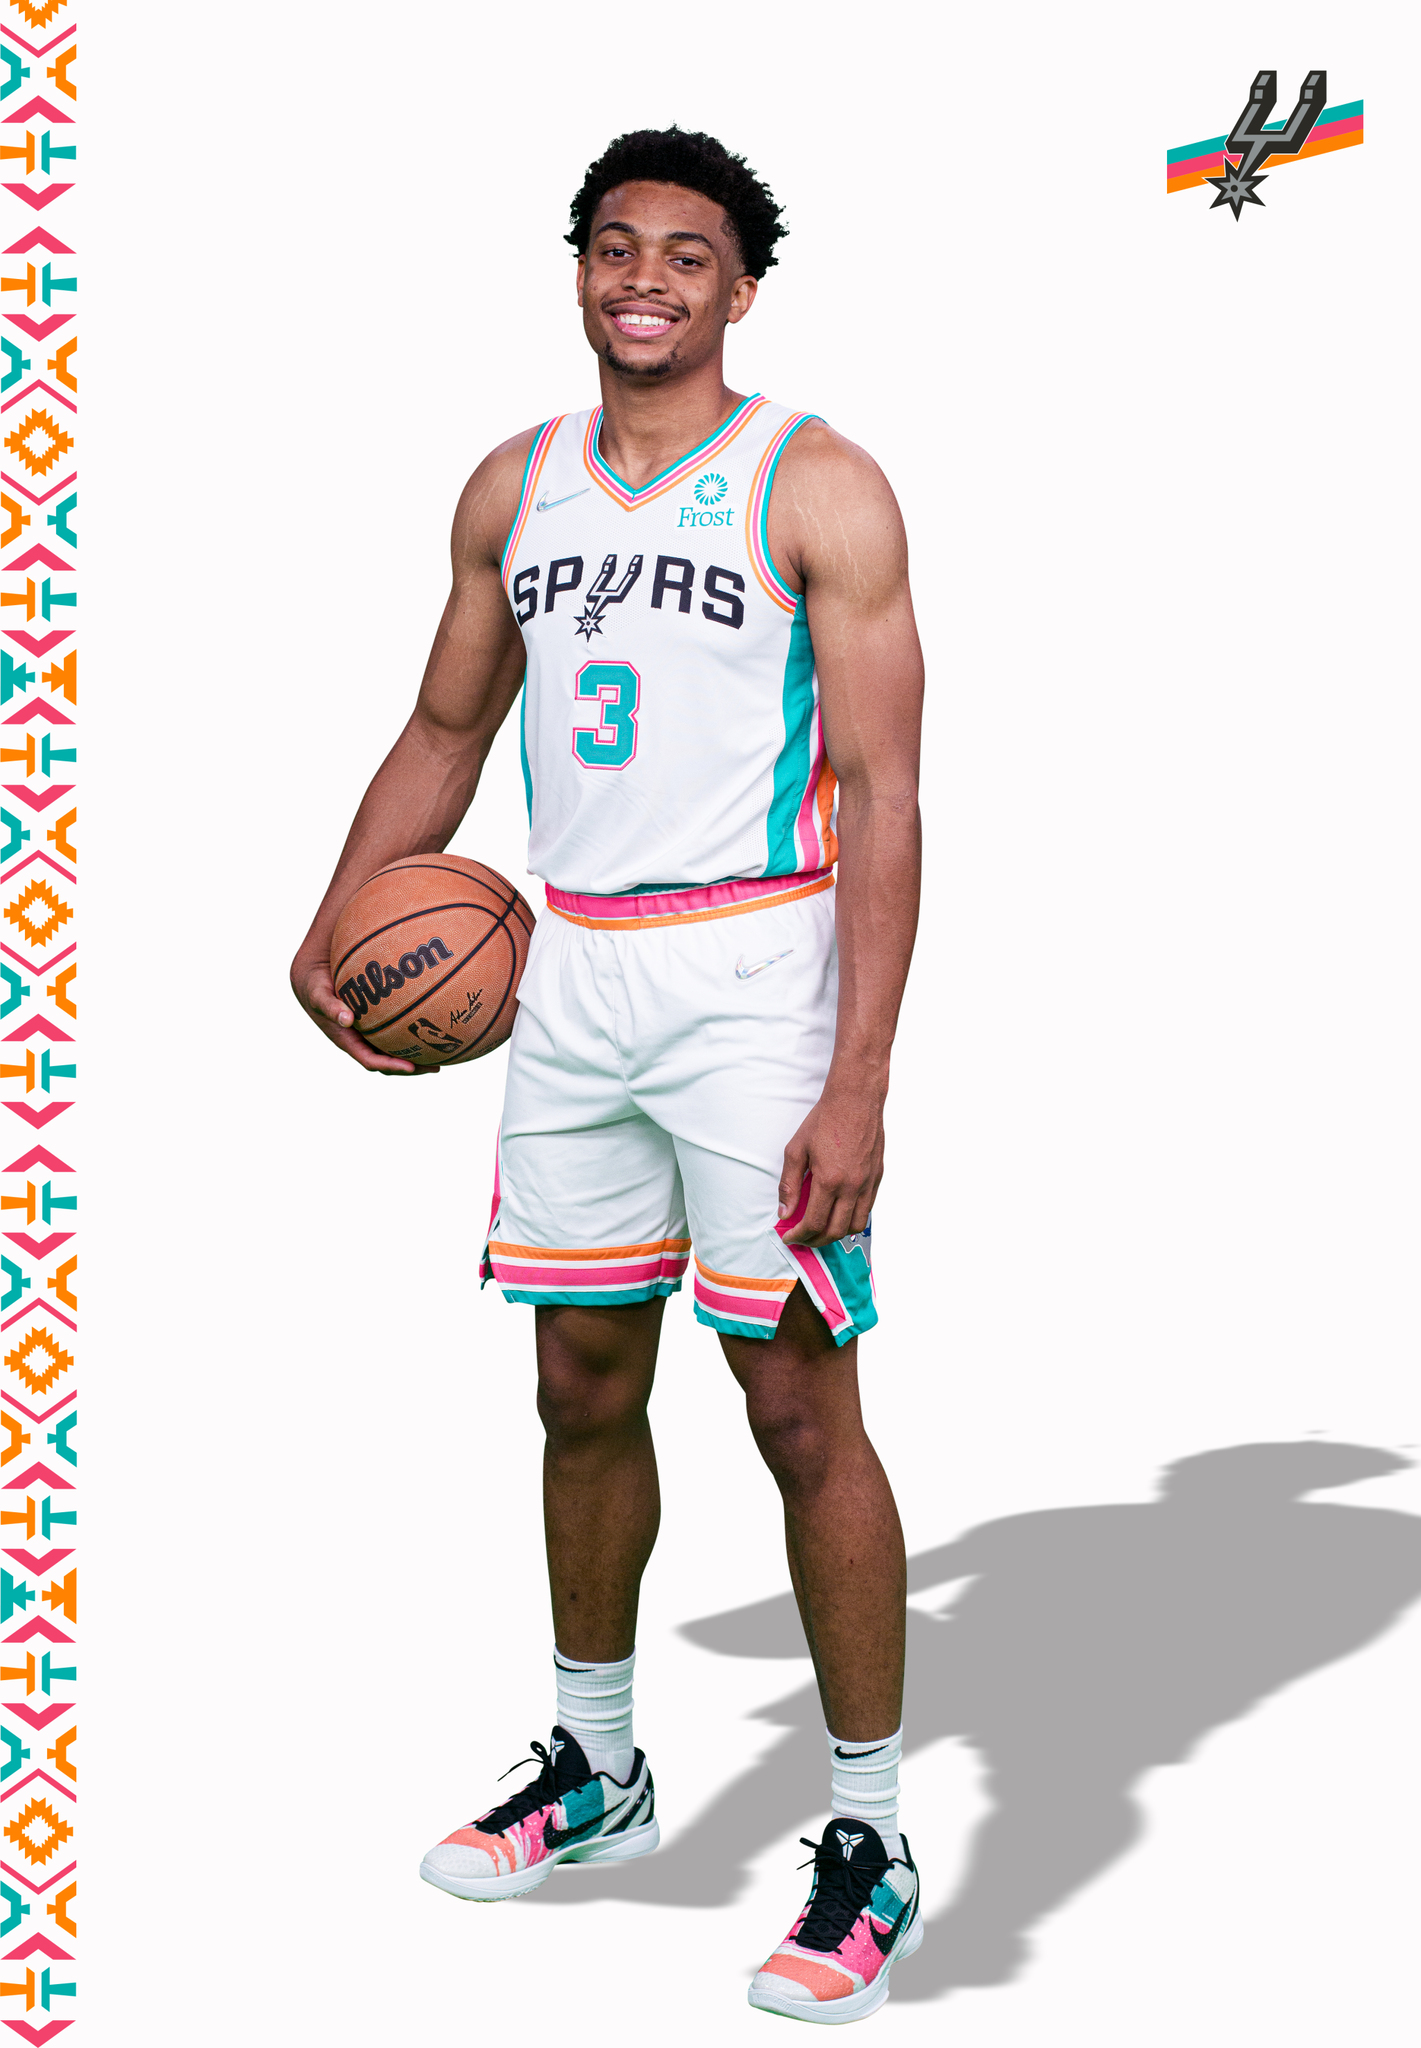 Spurs' Fiesta-themed City Edition uniforms pay homage to team's